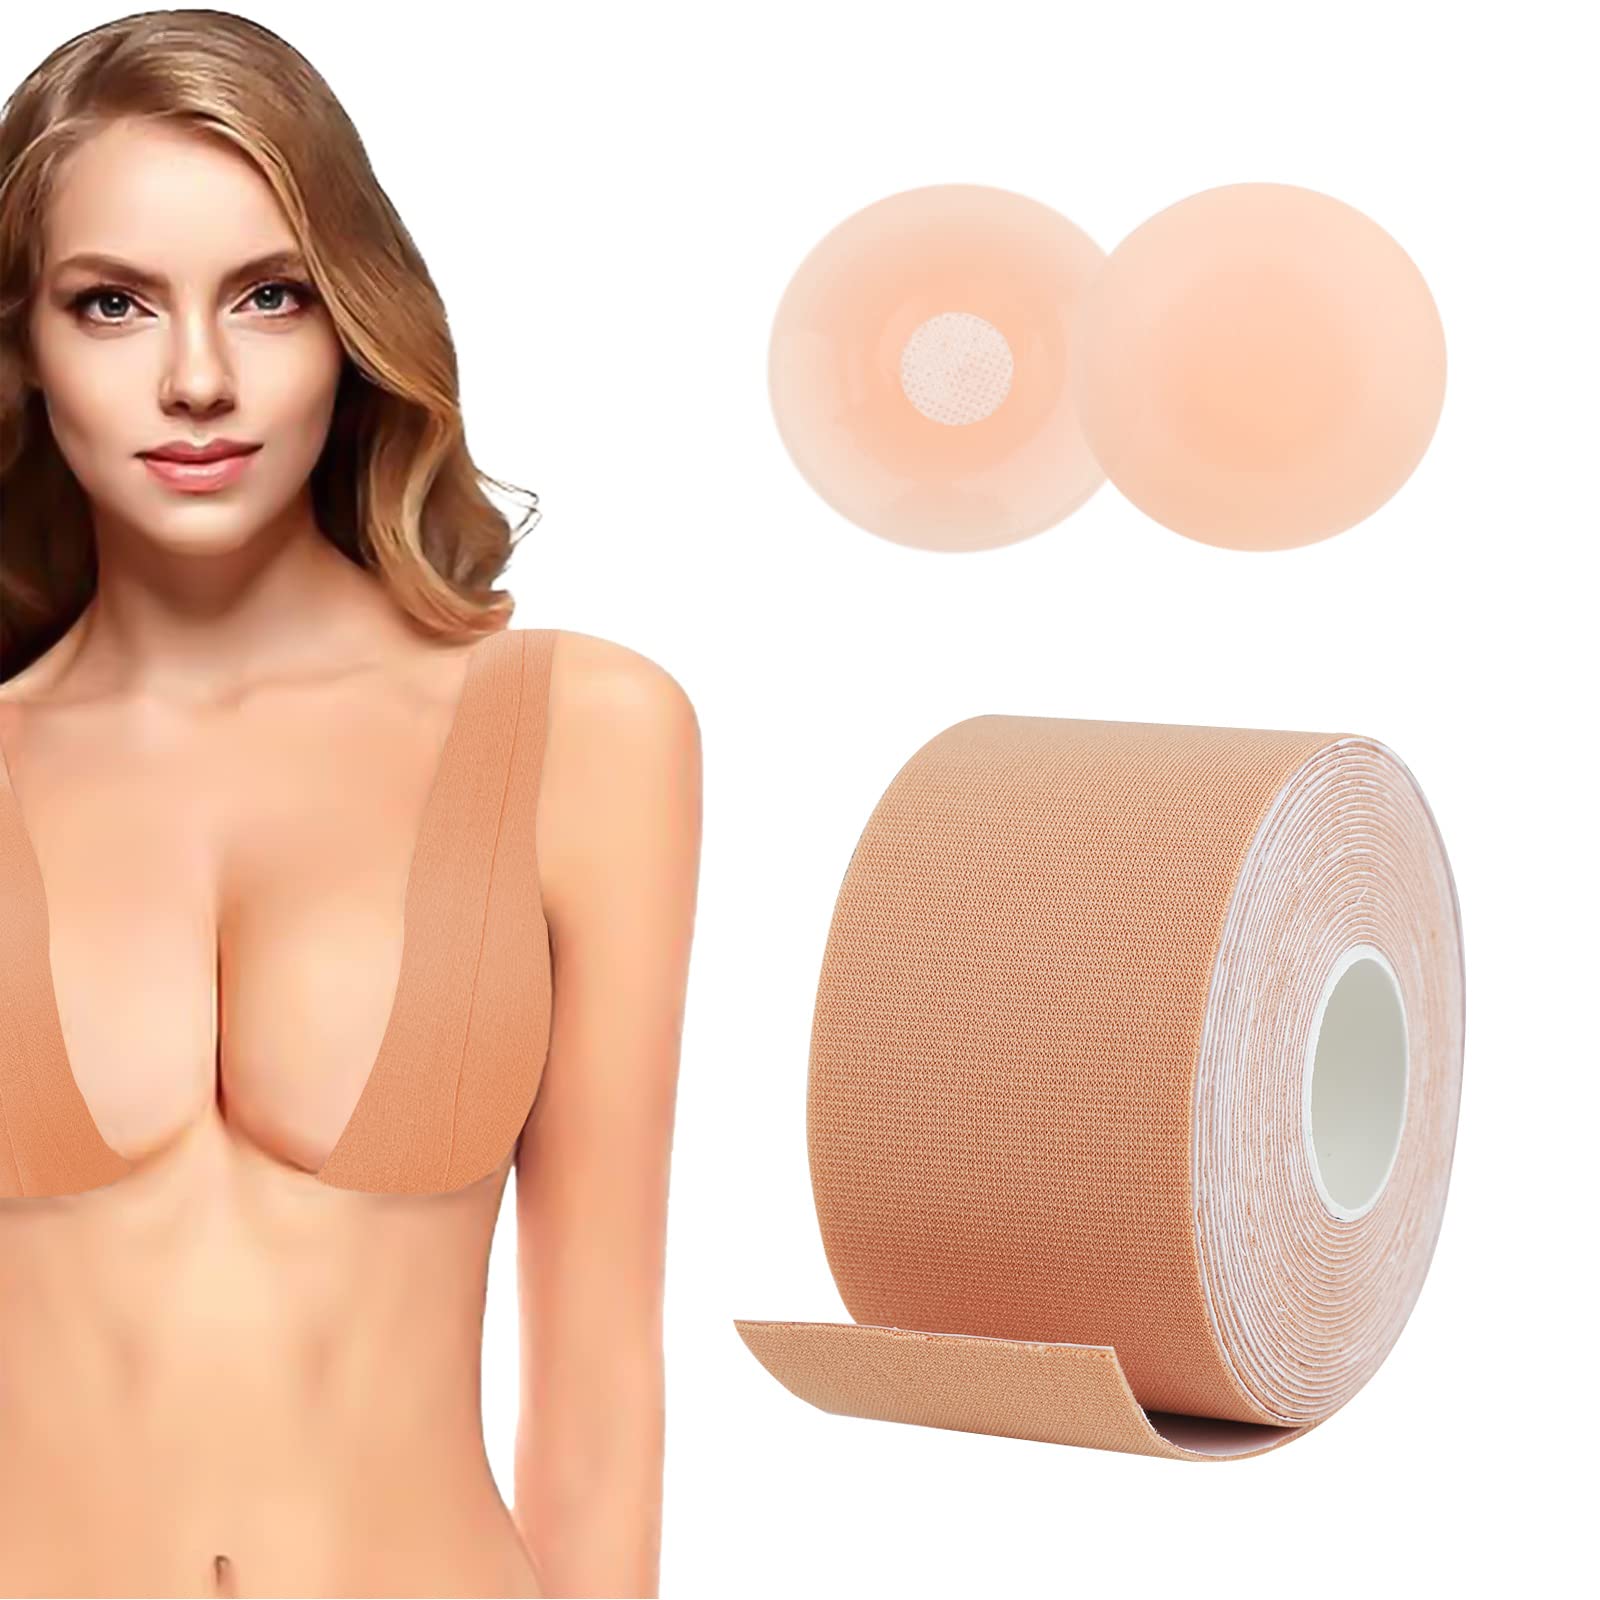  Boob Tape, Body Tape for Breast Lift with 2 Pcs